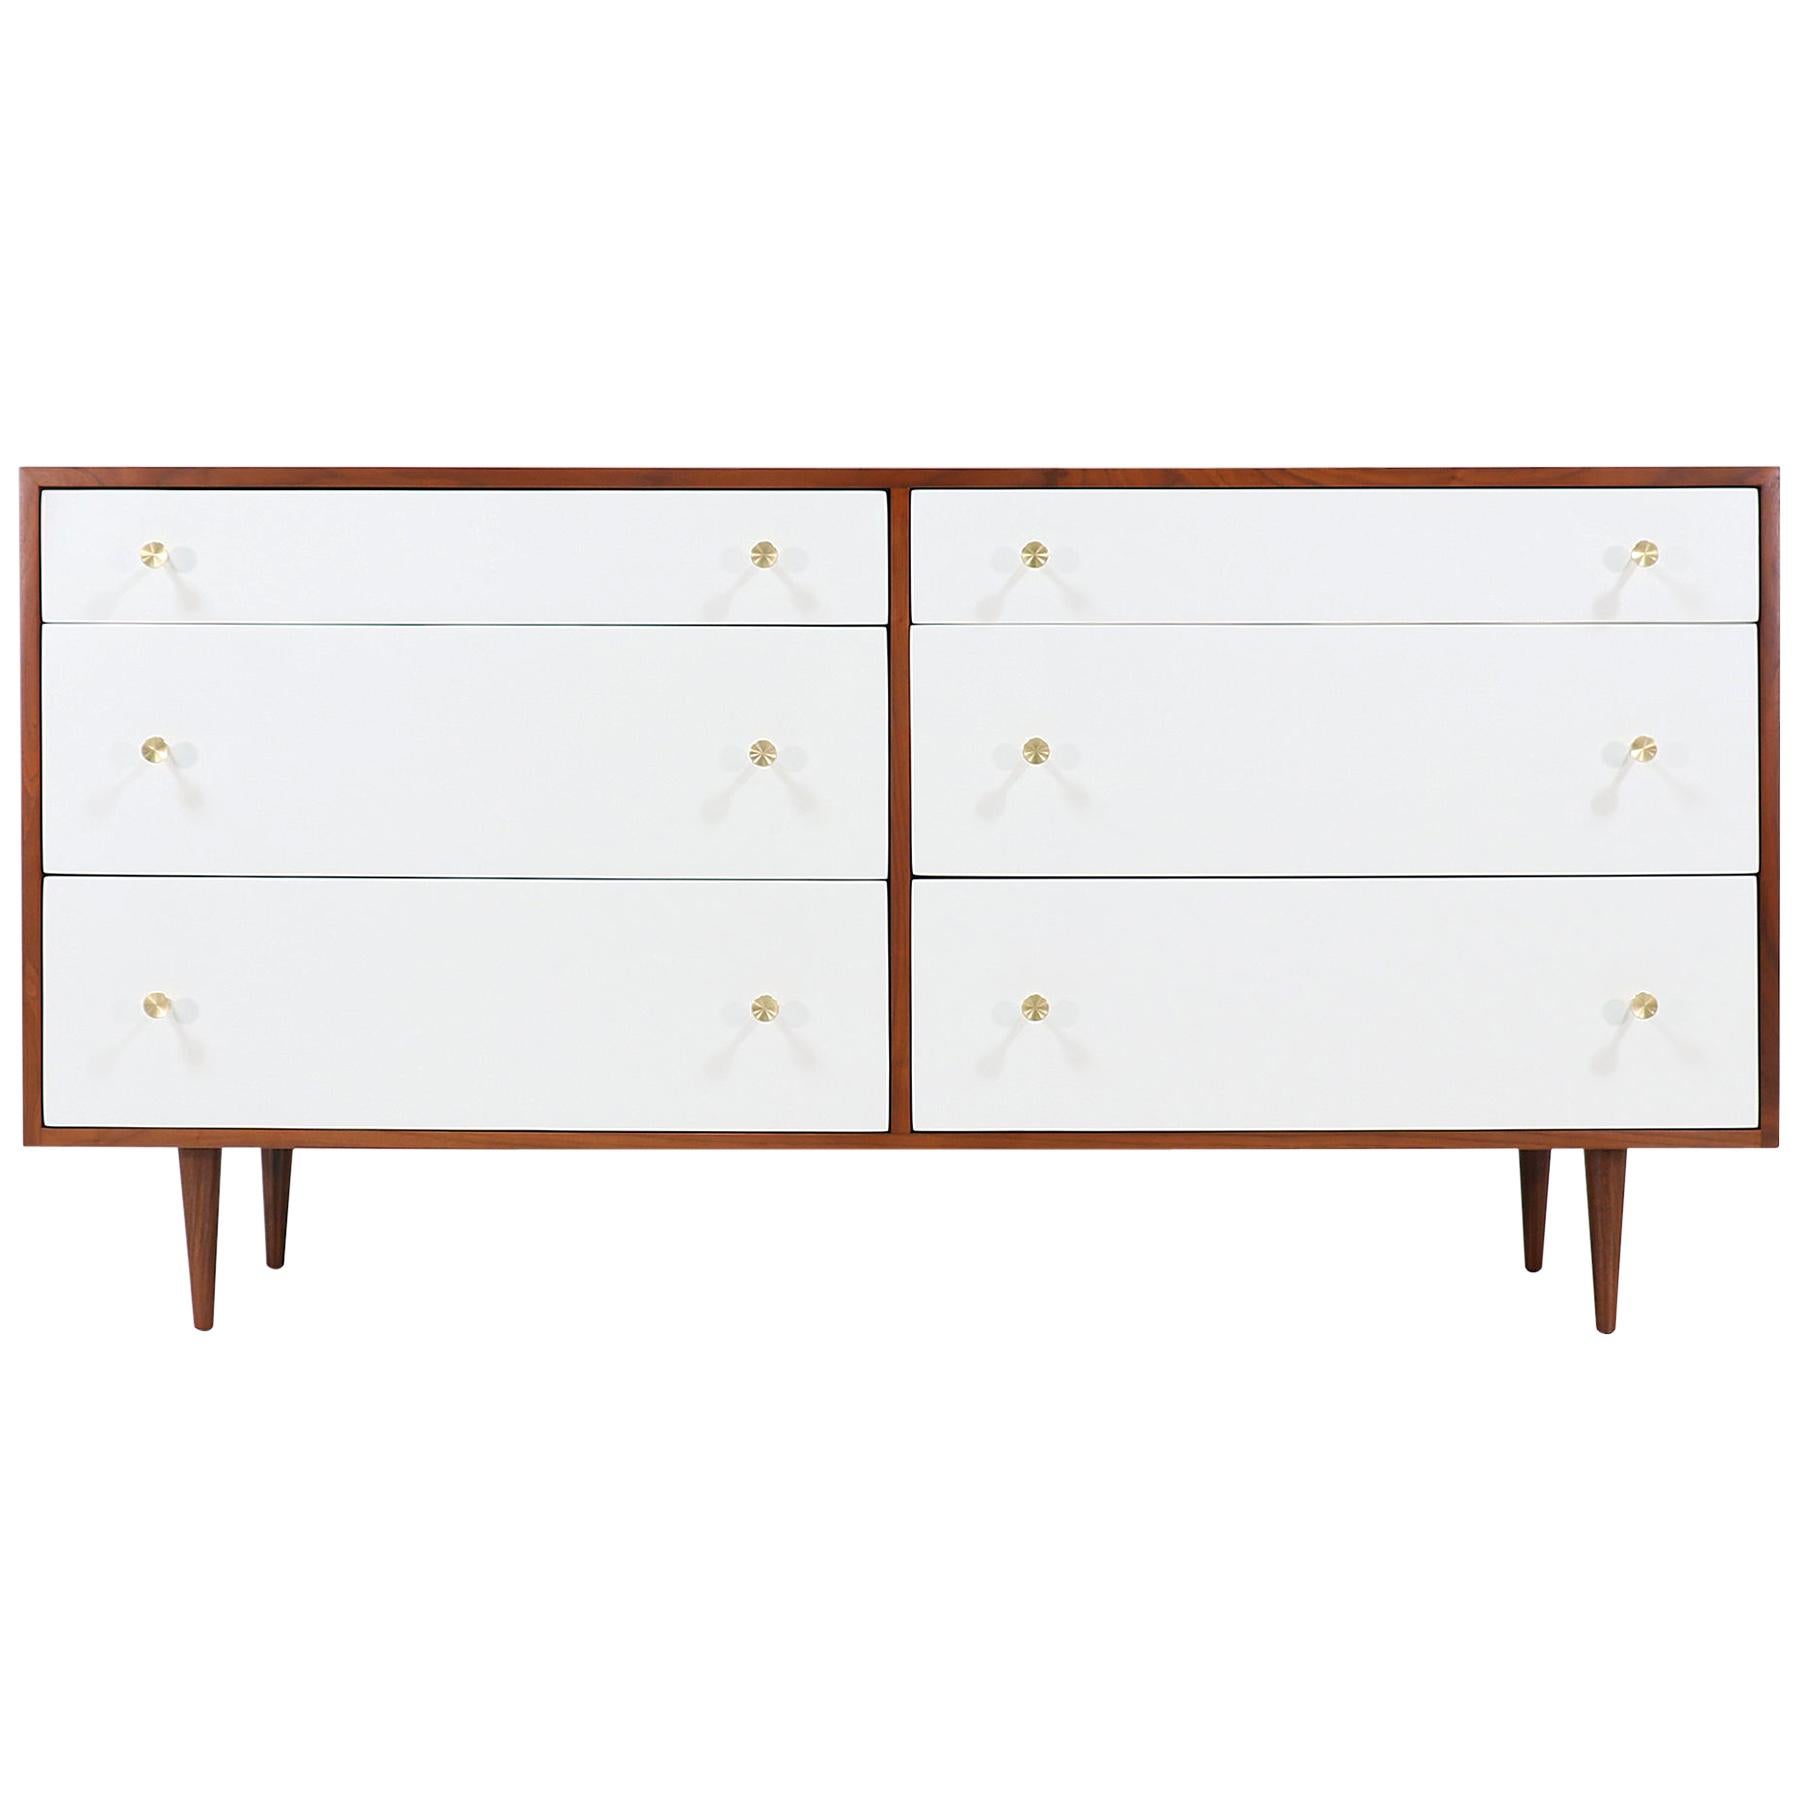 Stylish Mid-Century Modern dresser designed by Milo Baughman for Glenn of California in the United States, circa 1950s. This spectacular six-drawer dresser features dovetailed construction and a meticulous custom white lacquered finish that